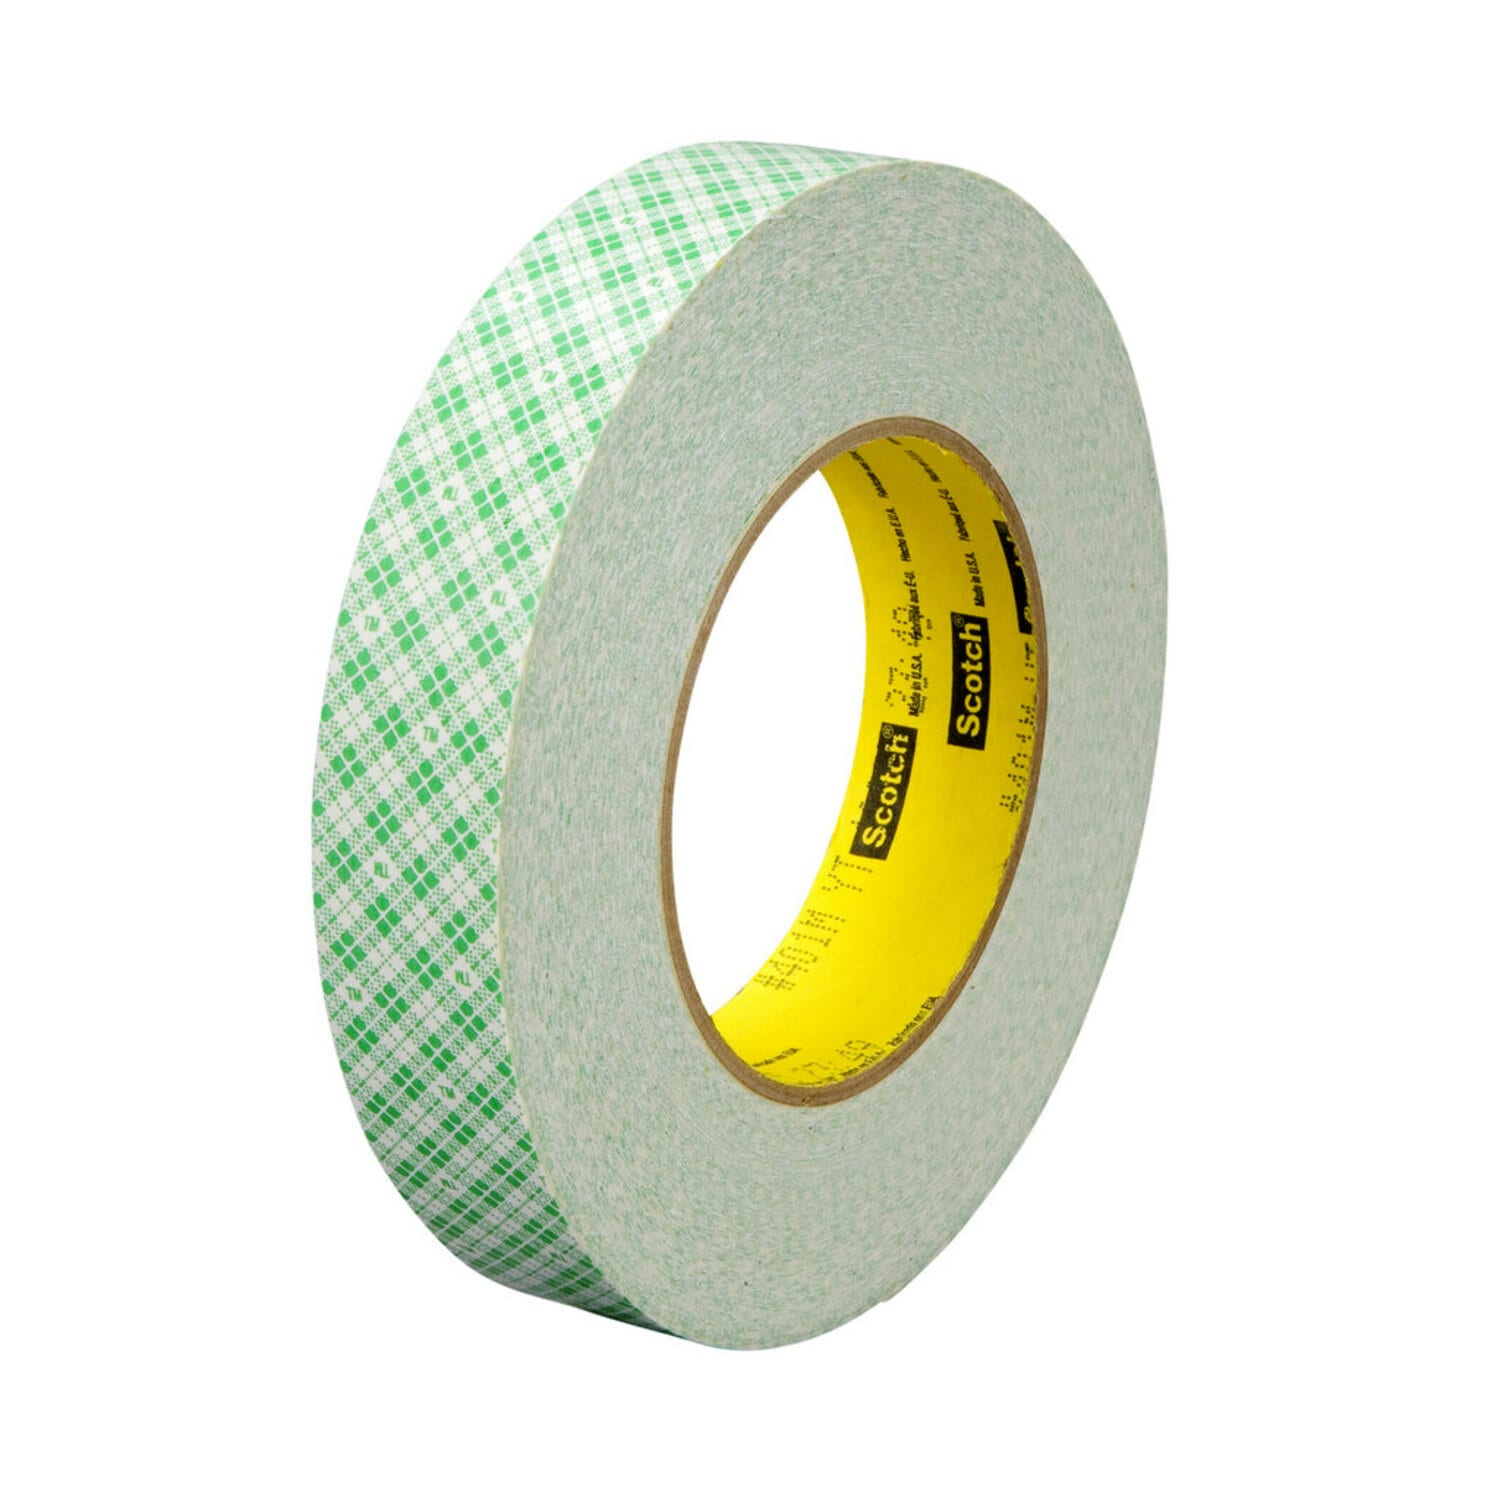 7010312983 - 3M Double Coated Paper Tape 401M, Natural, 1 1/2 in x 36 yd, 9 mil, 24
rolls per case